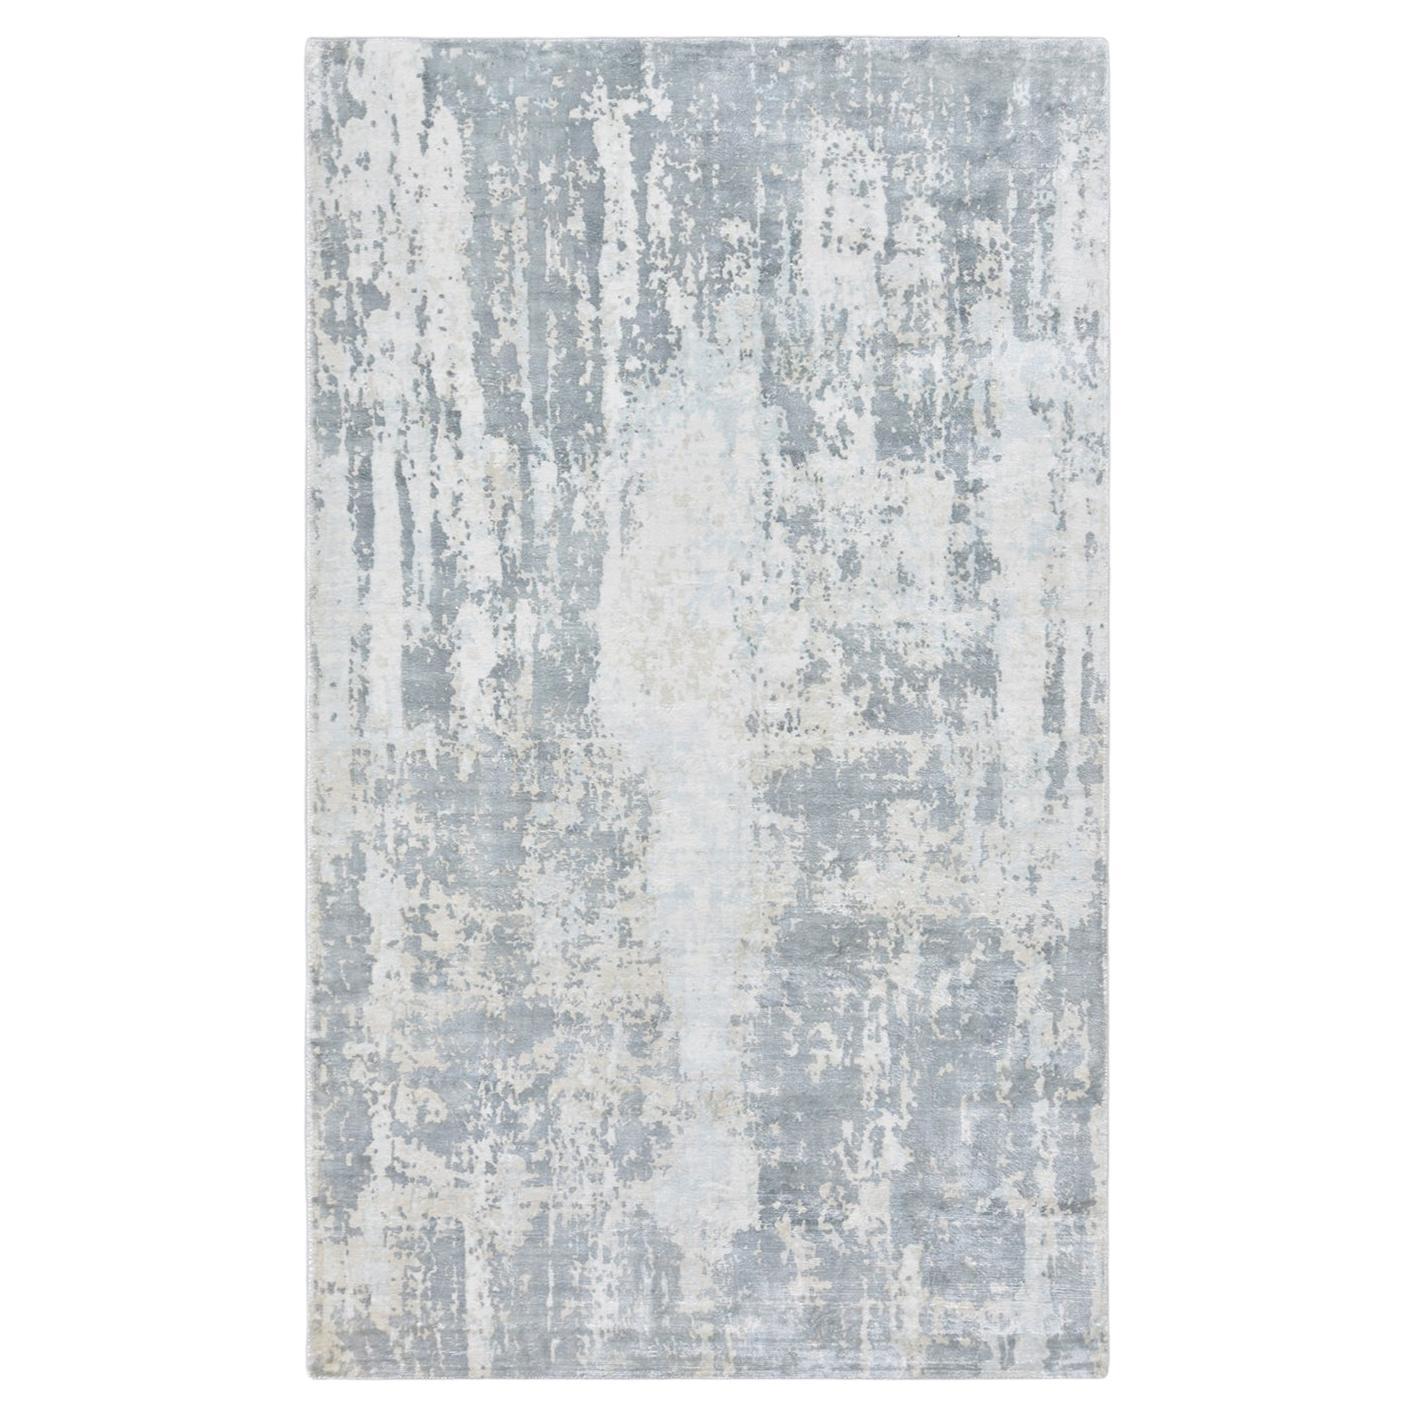 Solo Rugs Hagues Contemporary Abstract Handmade Area Rug Ivory For Sale